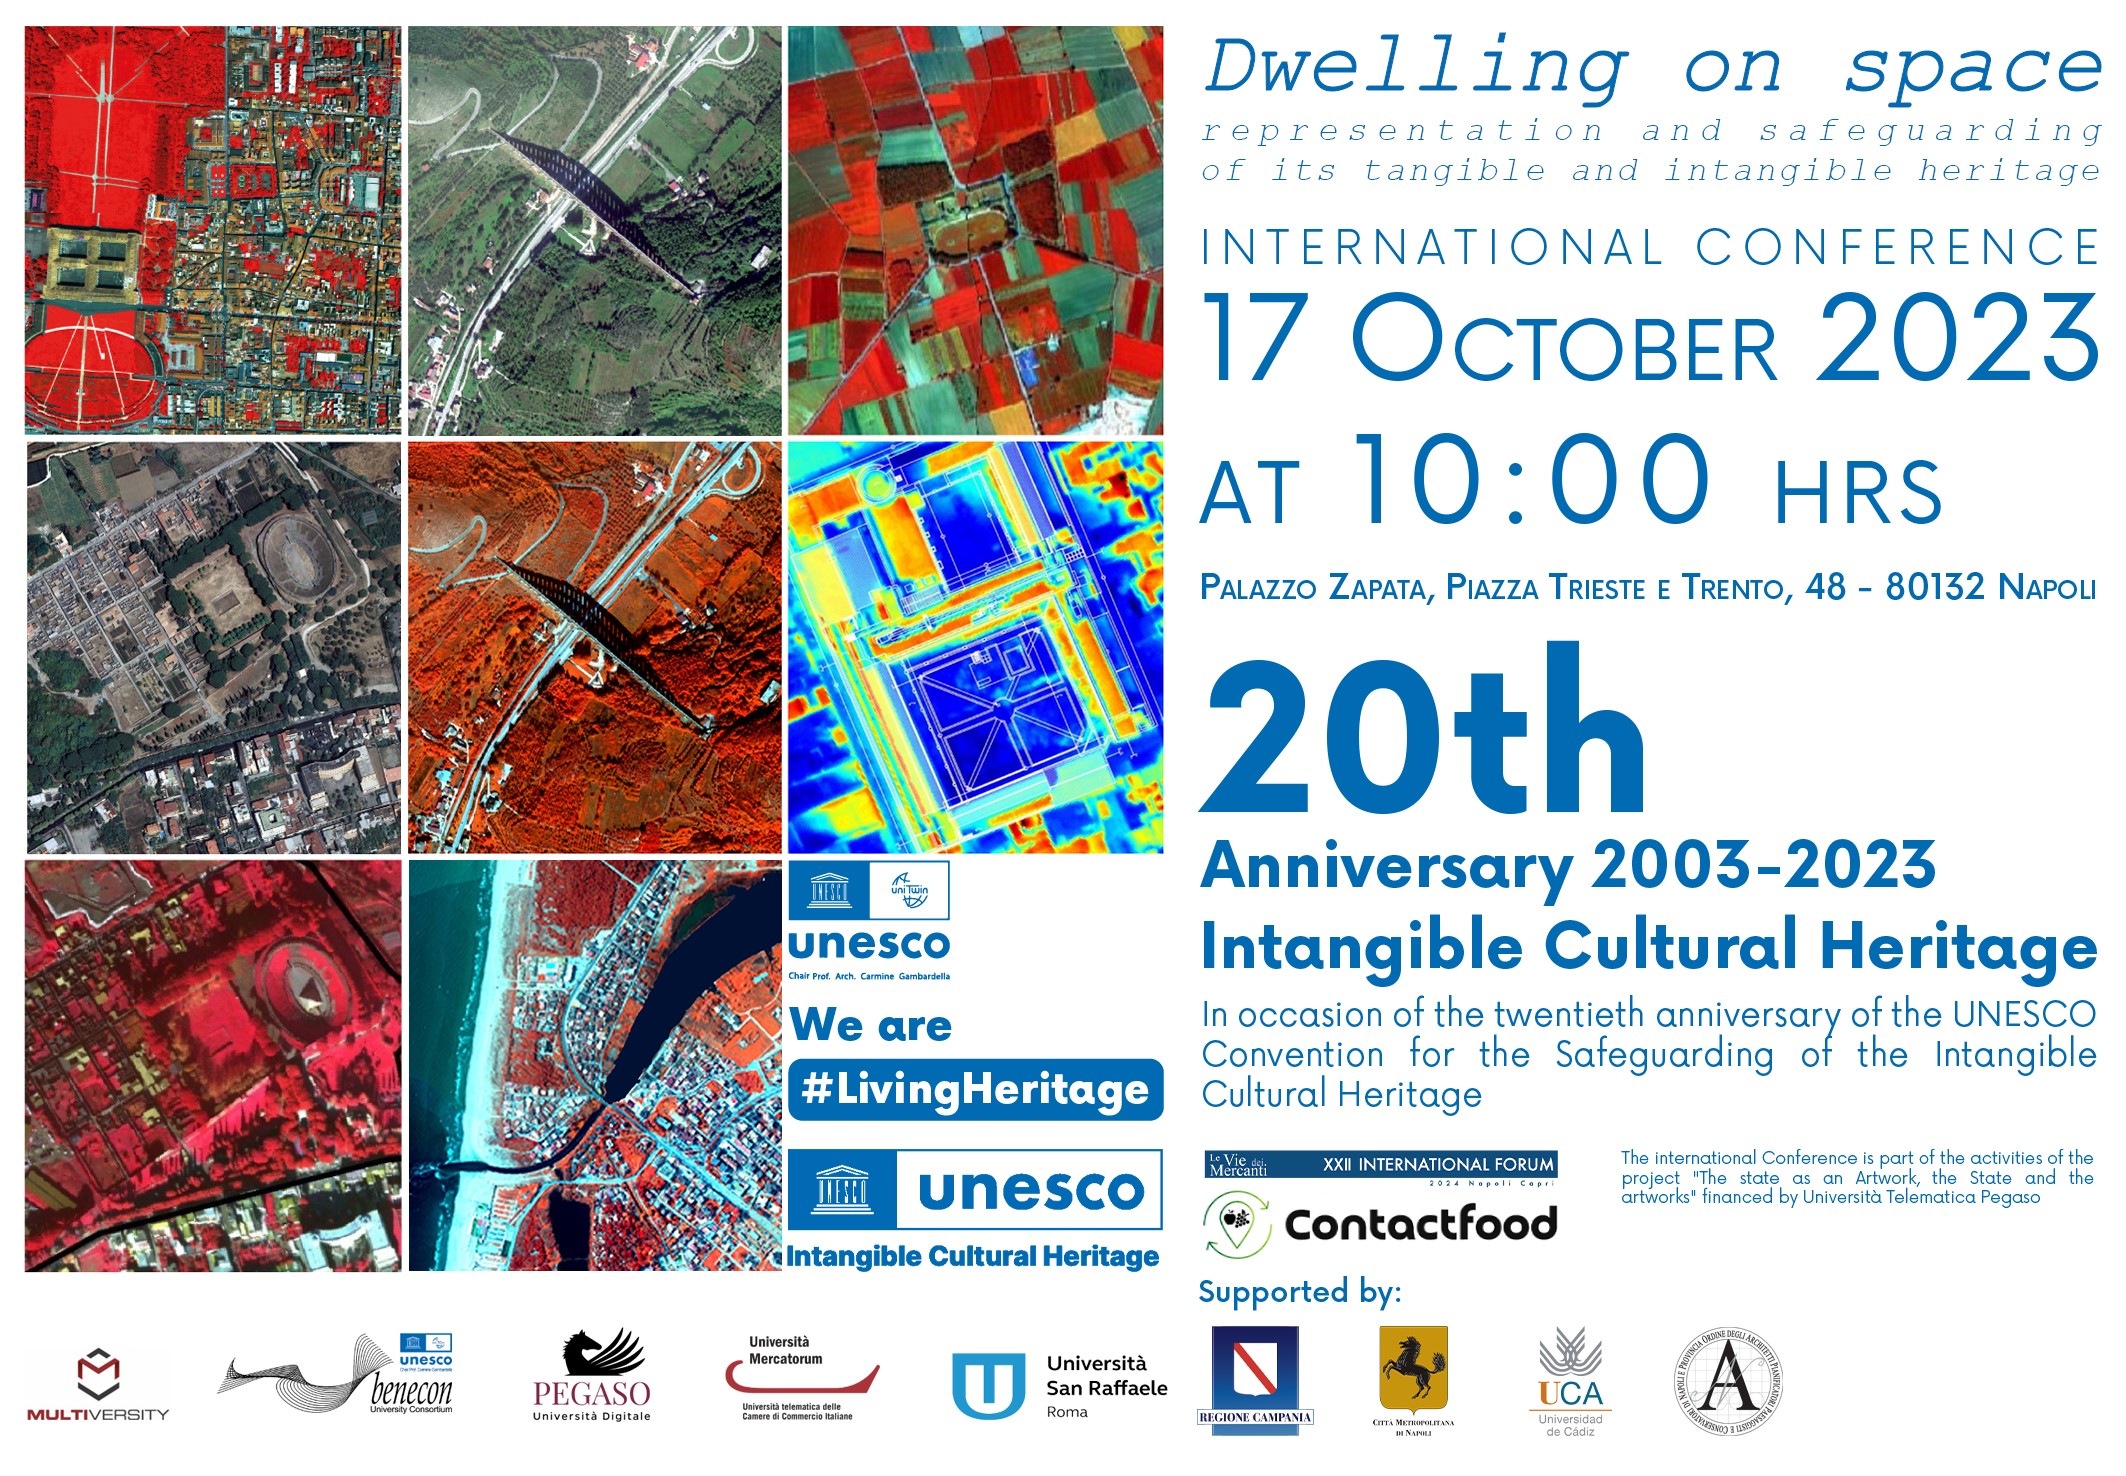 International Conference “Dwelling on Space: representation and safeguarding of its tangible and intangible heritage”